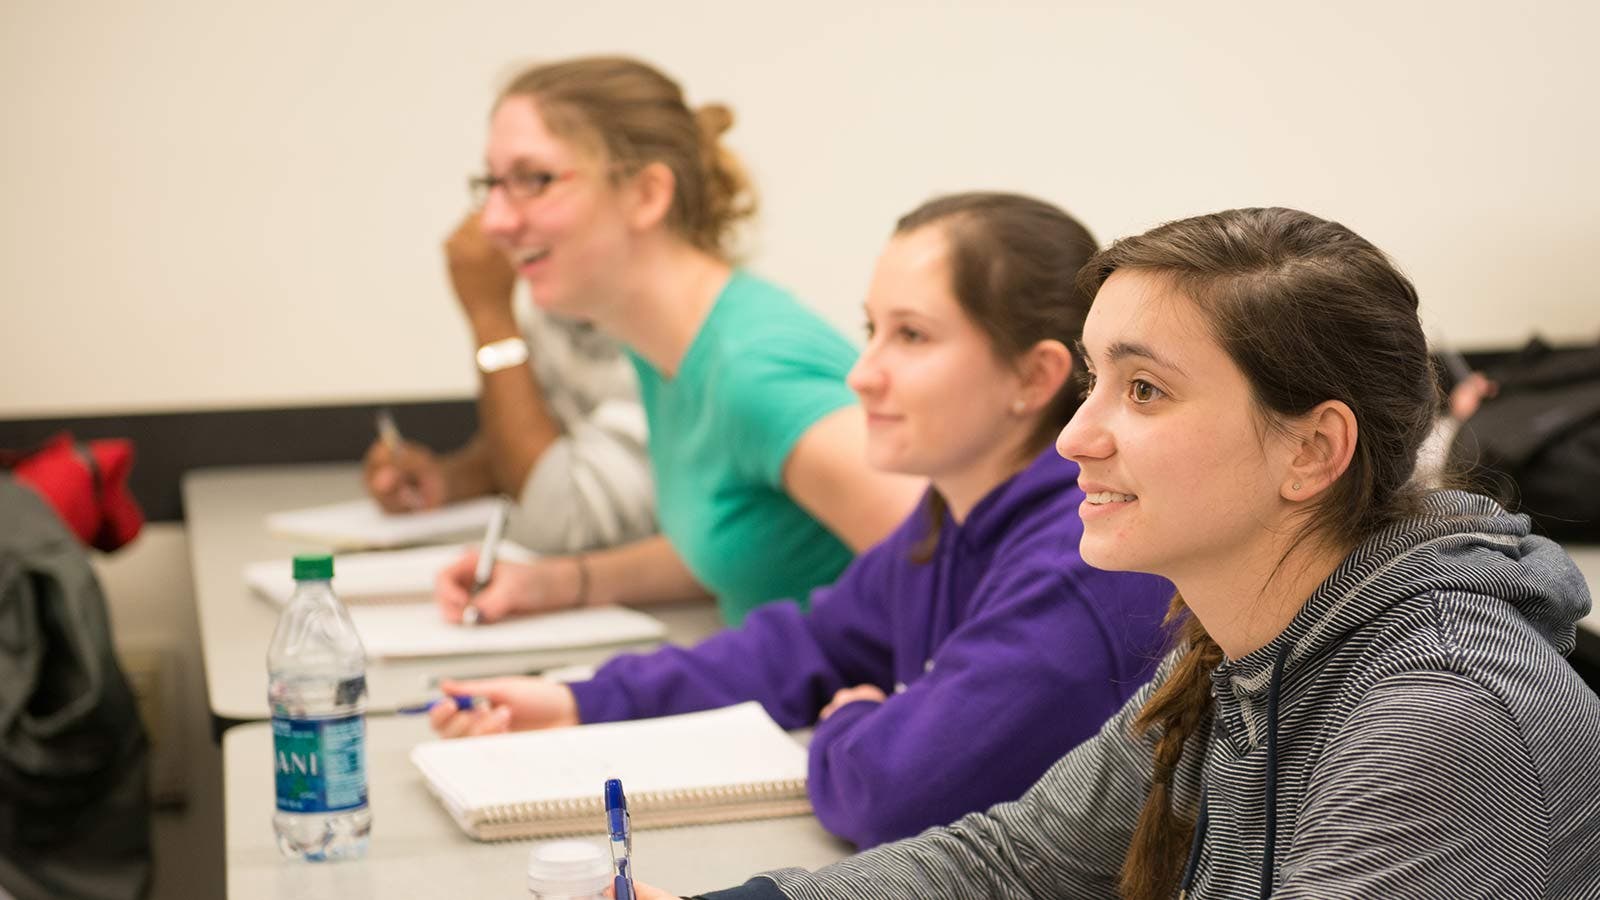 James Madison University students in class